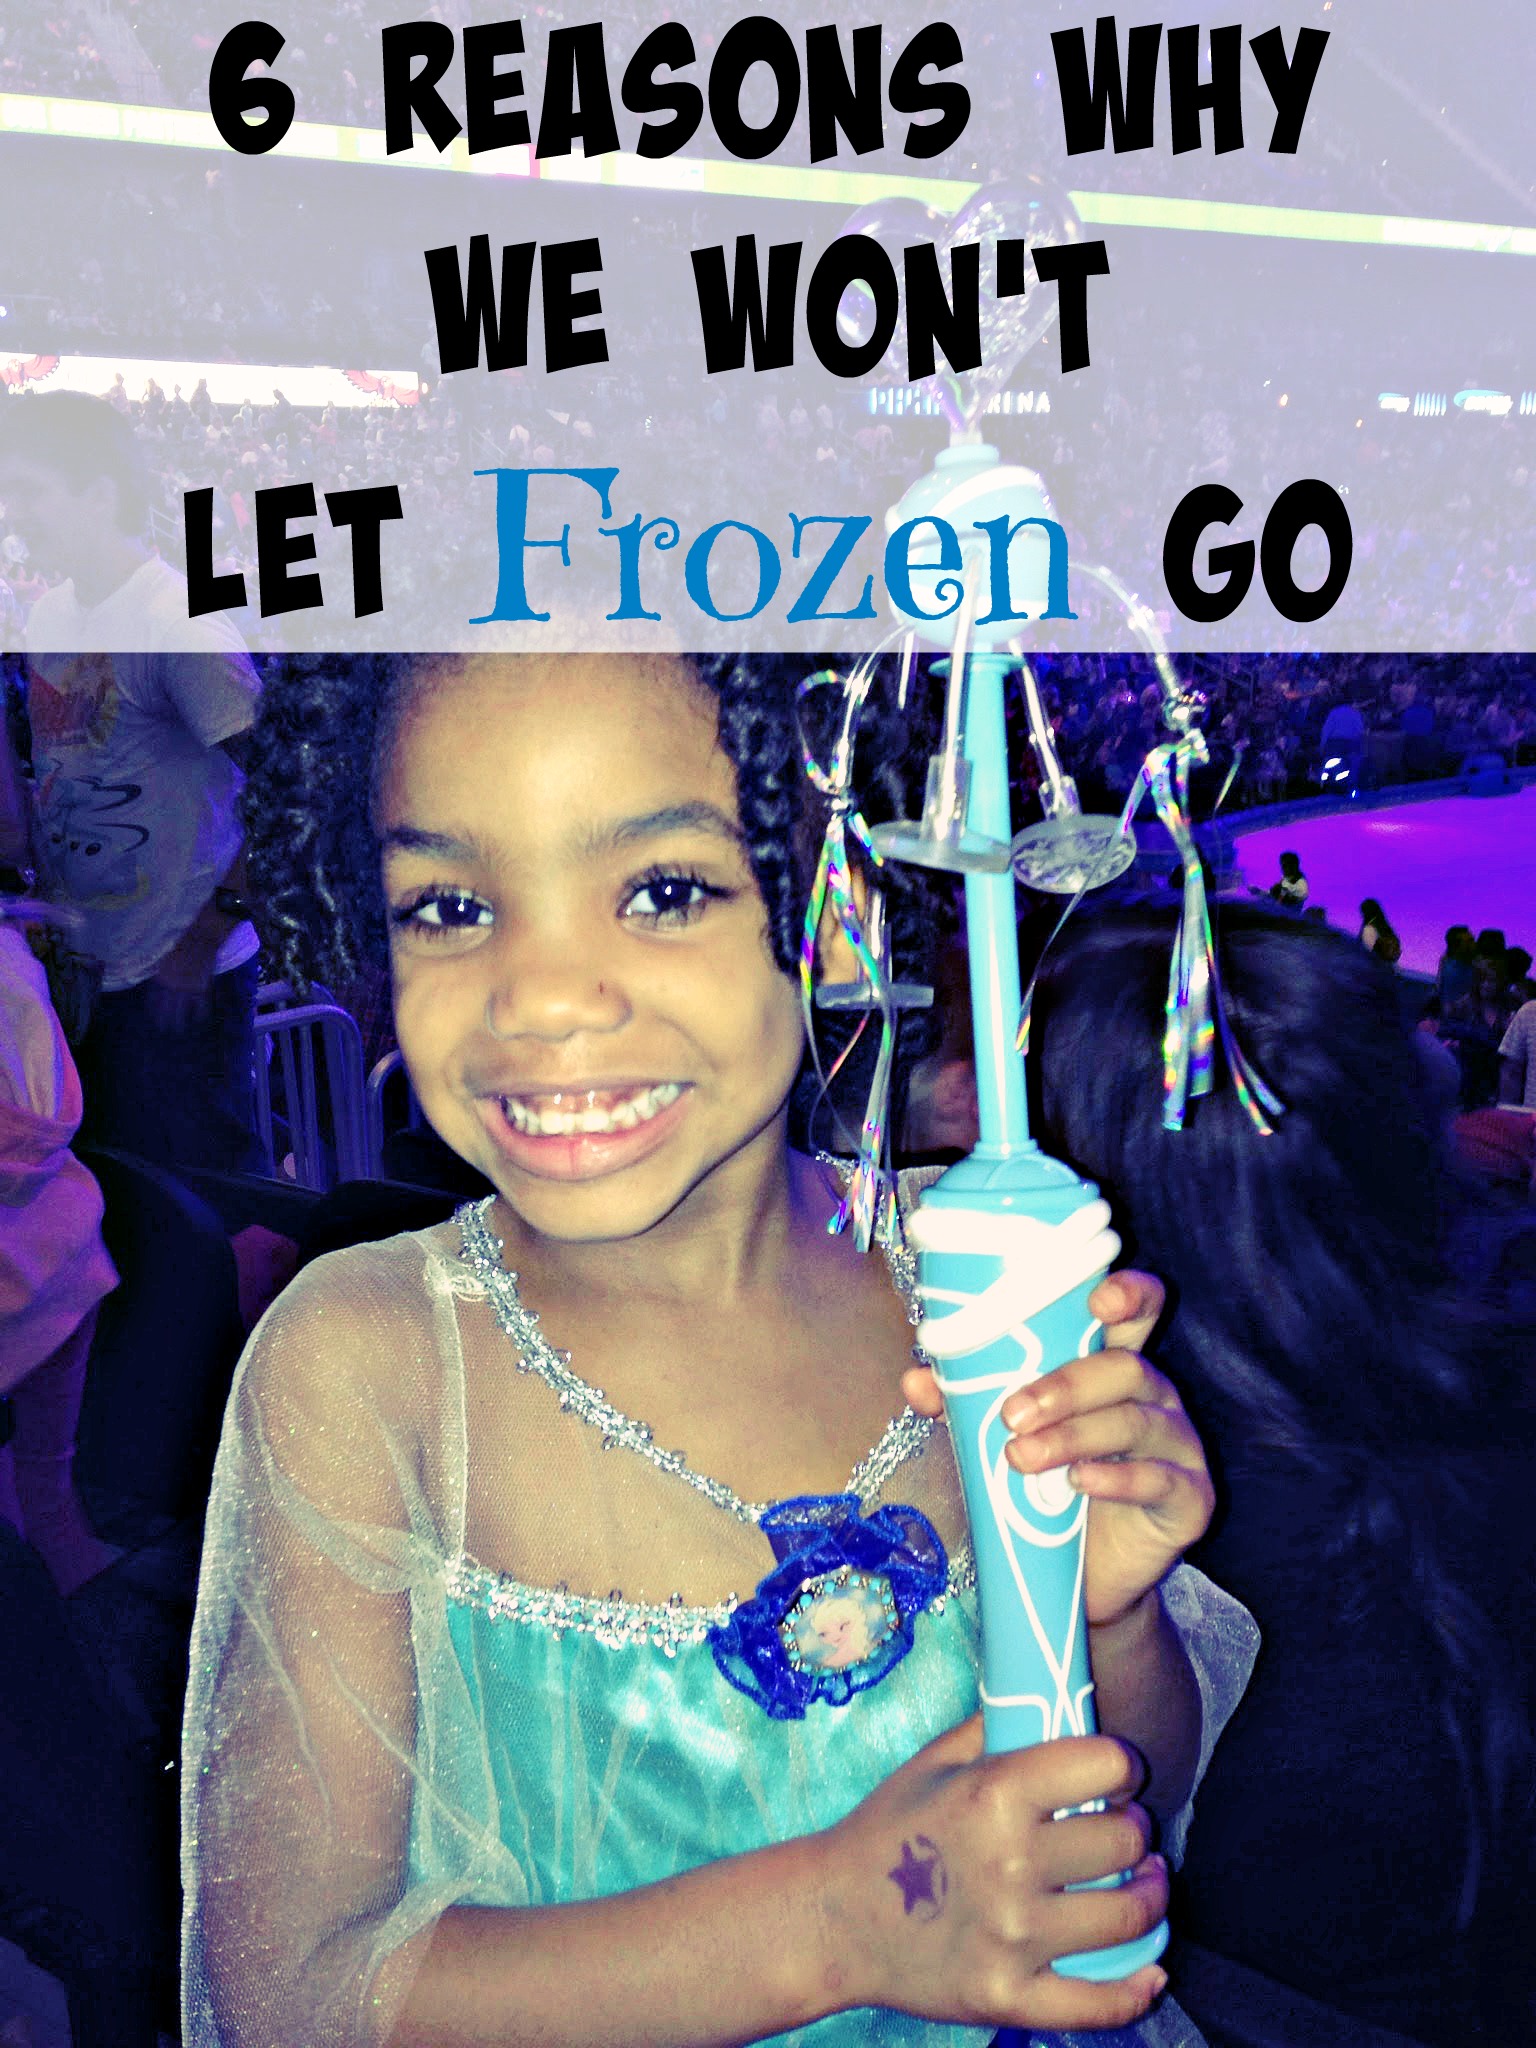 6 Reasons Why We Won’t Let Frozen Go